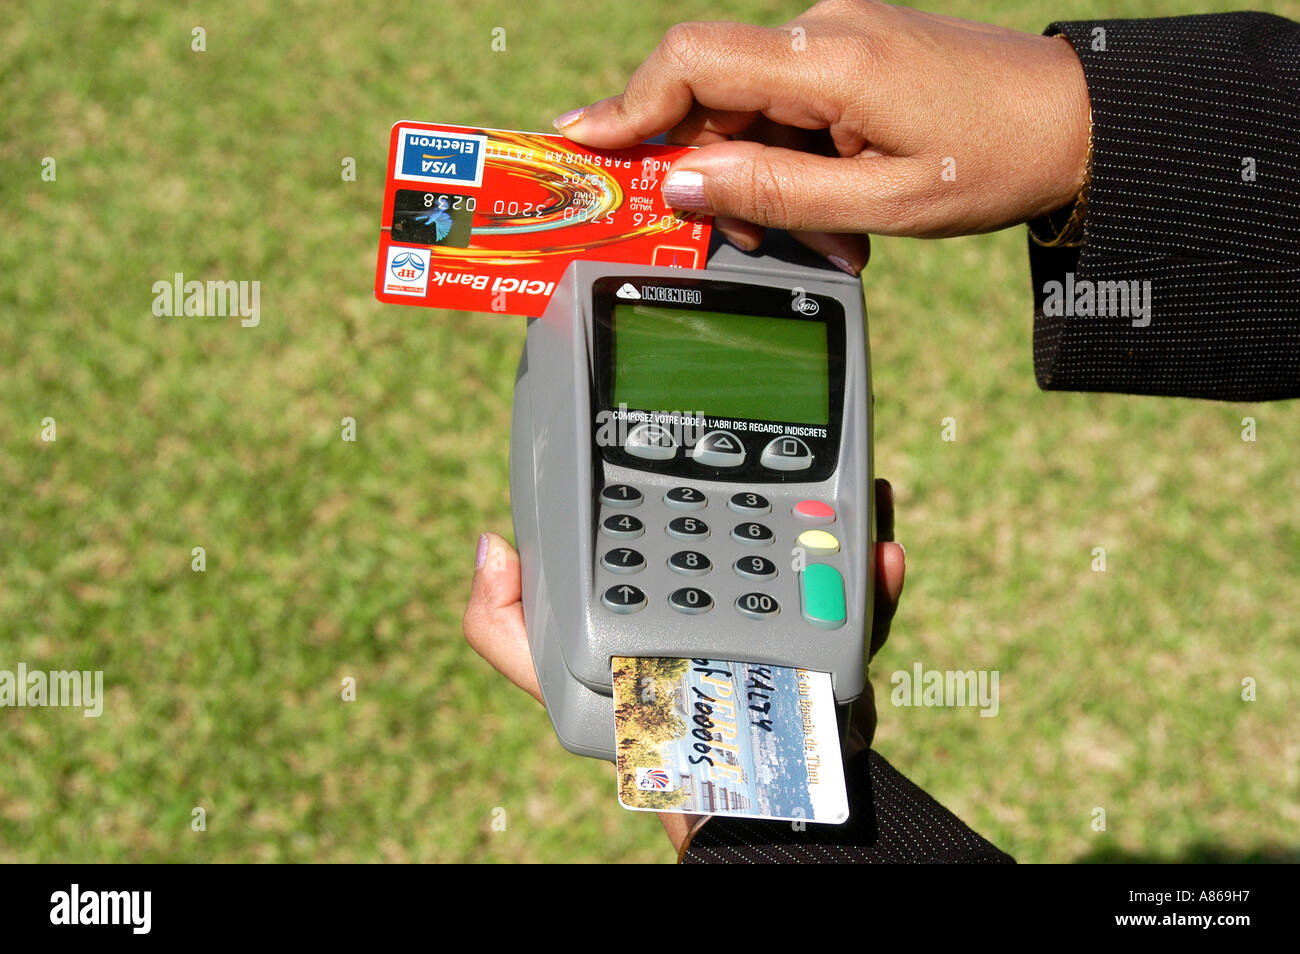 67,000+ Credit Card Machine Pictures